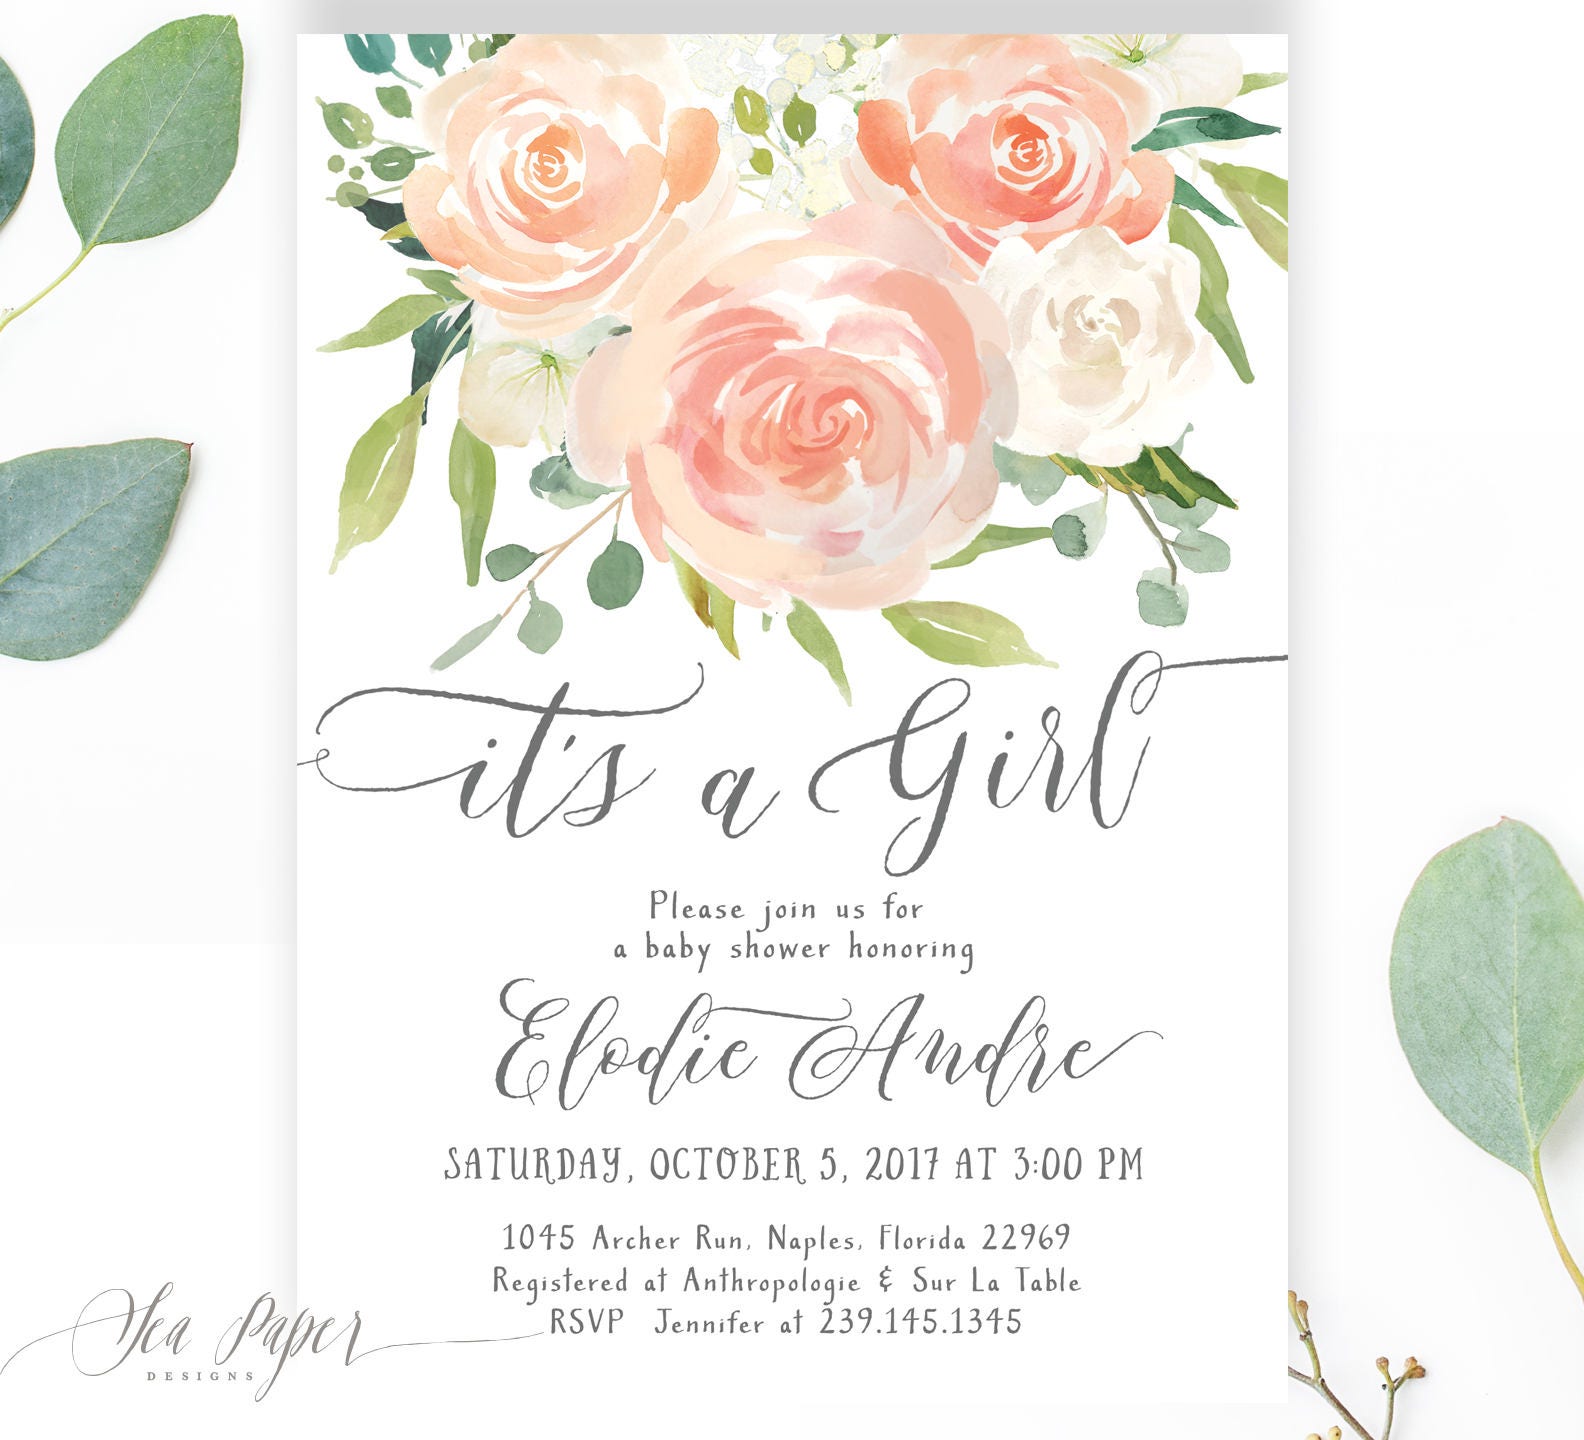 Baby Shower Invitation Girl, It's A Girl Invite, Rustic Greenery & Blush Pink Peach Roses, Printed Or Printable - Elodie"